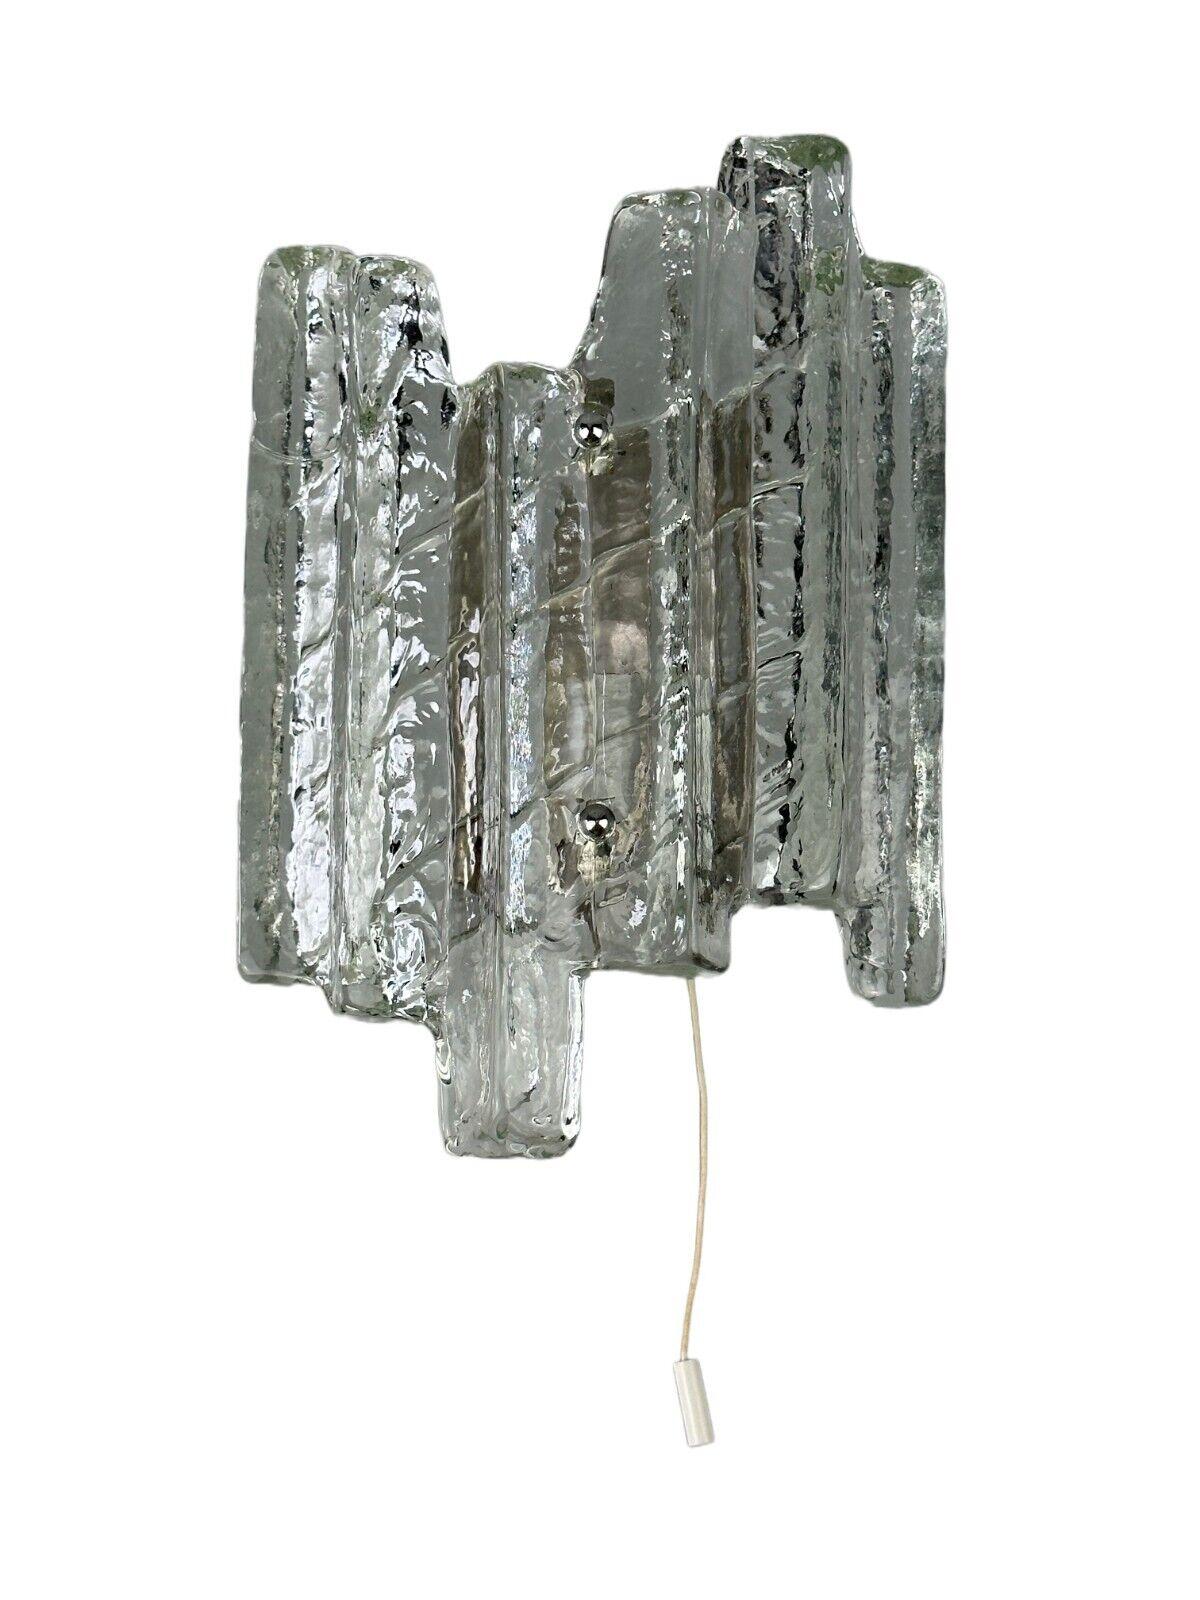 60s 70s wall lamp Wall Sconce Fischer Leuchten Germany Ice Glas Design

Object: wall lamp

Manufacturer: Fischer lights

Condition: good

Age: around 1960-1970

Dimensions:

Height = 27cm
Width = 19cm
Depth = 8cm

Other notes:

E14 socket

The